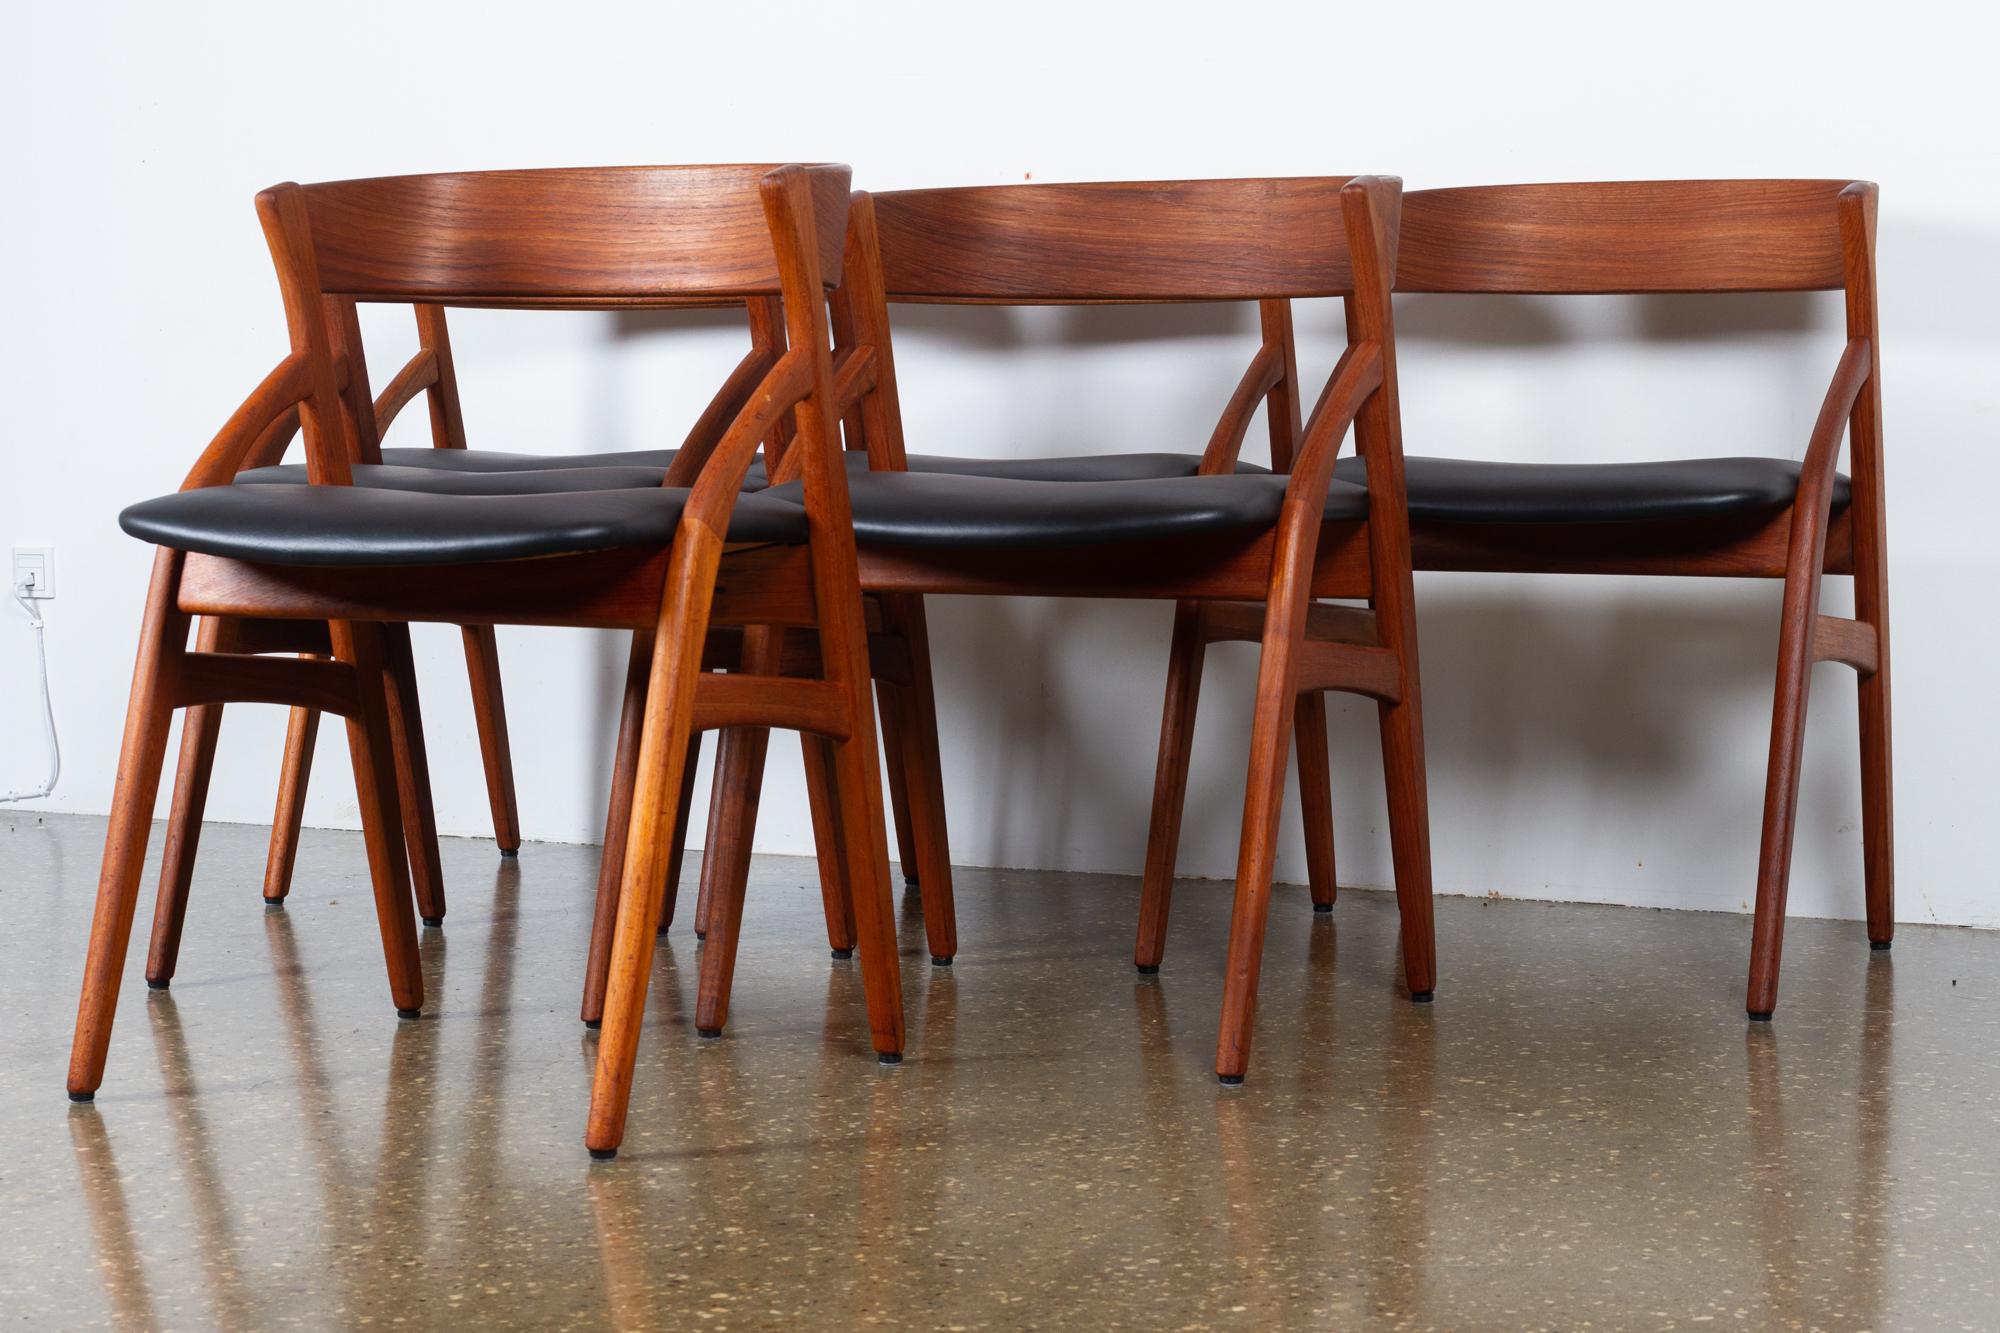 Vintage Danish teak dining chairs 1960s set of 6
Set of six elegant Mid-Century Modern dining chairs with frames in solid teak and new period correct leatherette upholstery and high density foam.
Beautiful organic shaped frame with rounded tapered